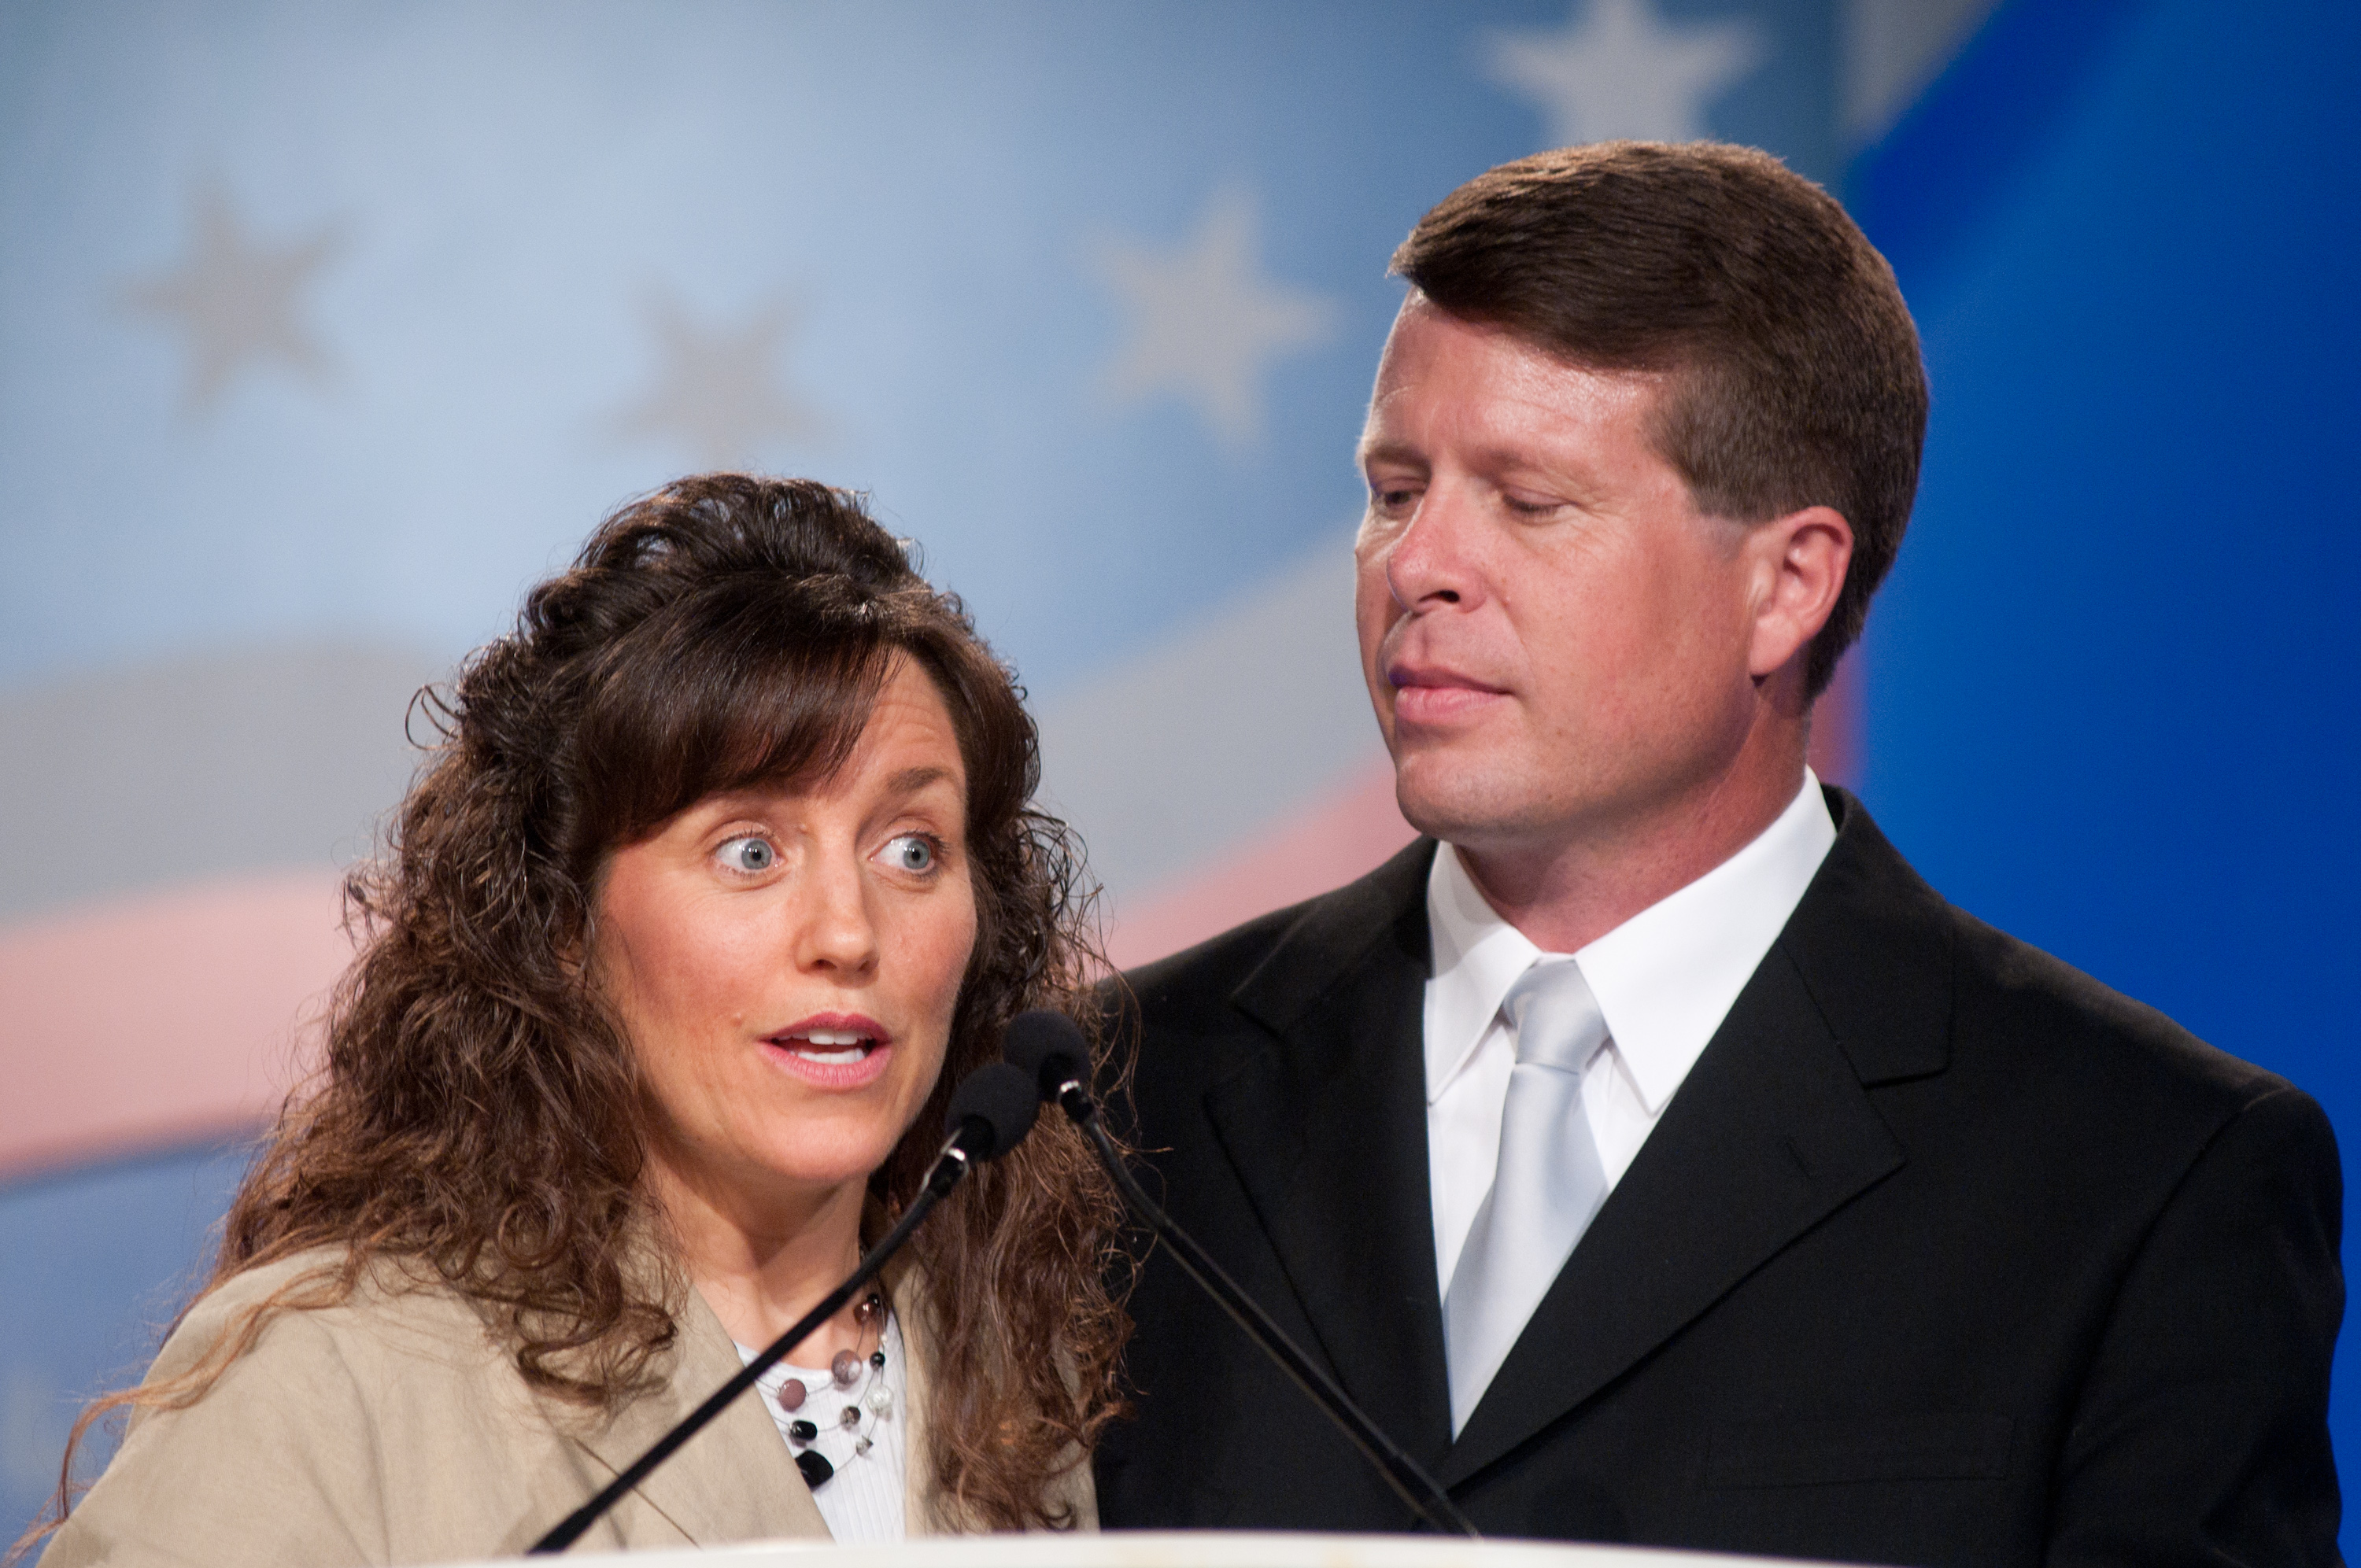 Michelle Duggar and Jim Bob Duggar at the Values Voters Summit in 2010